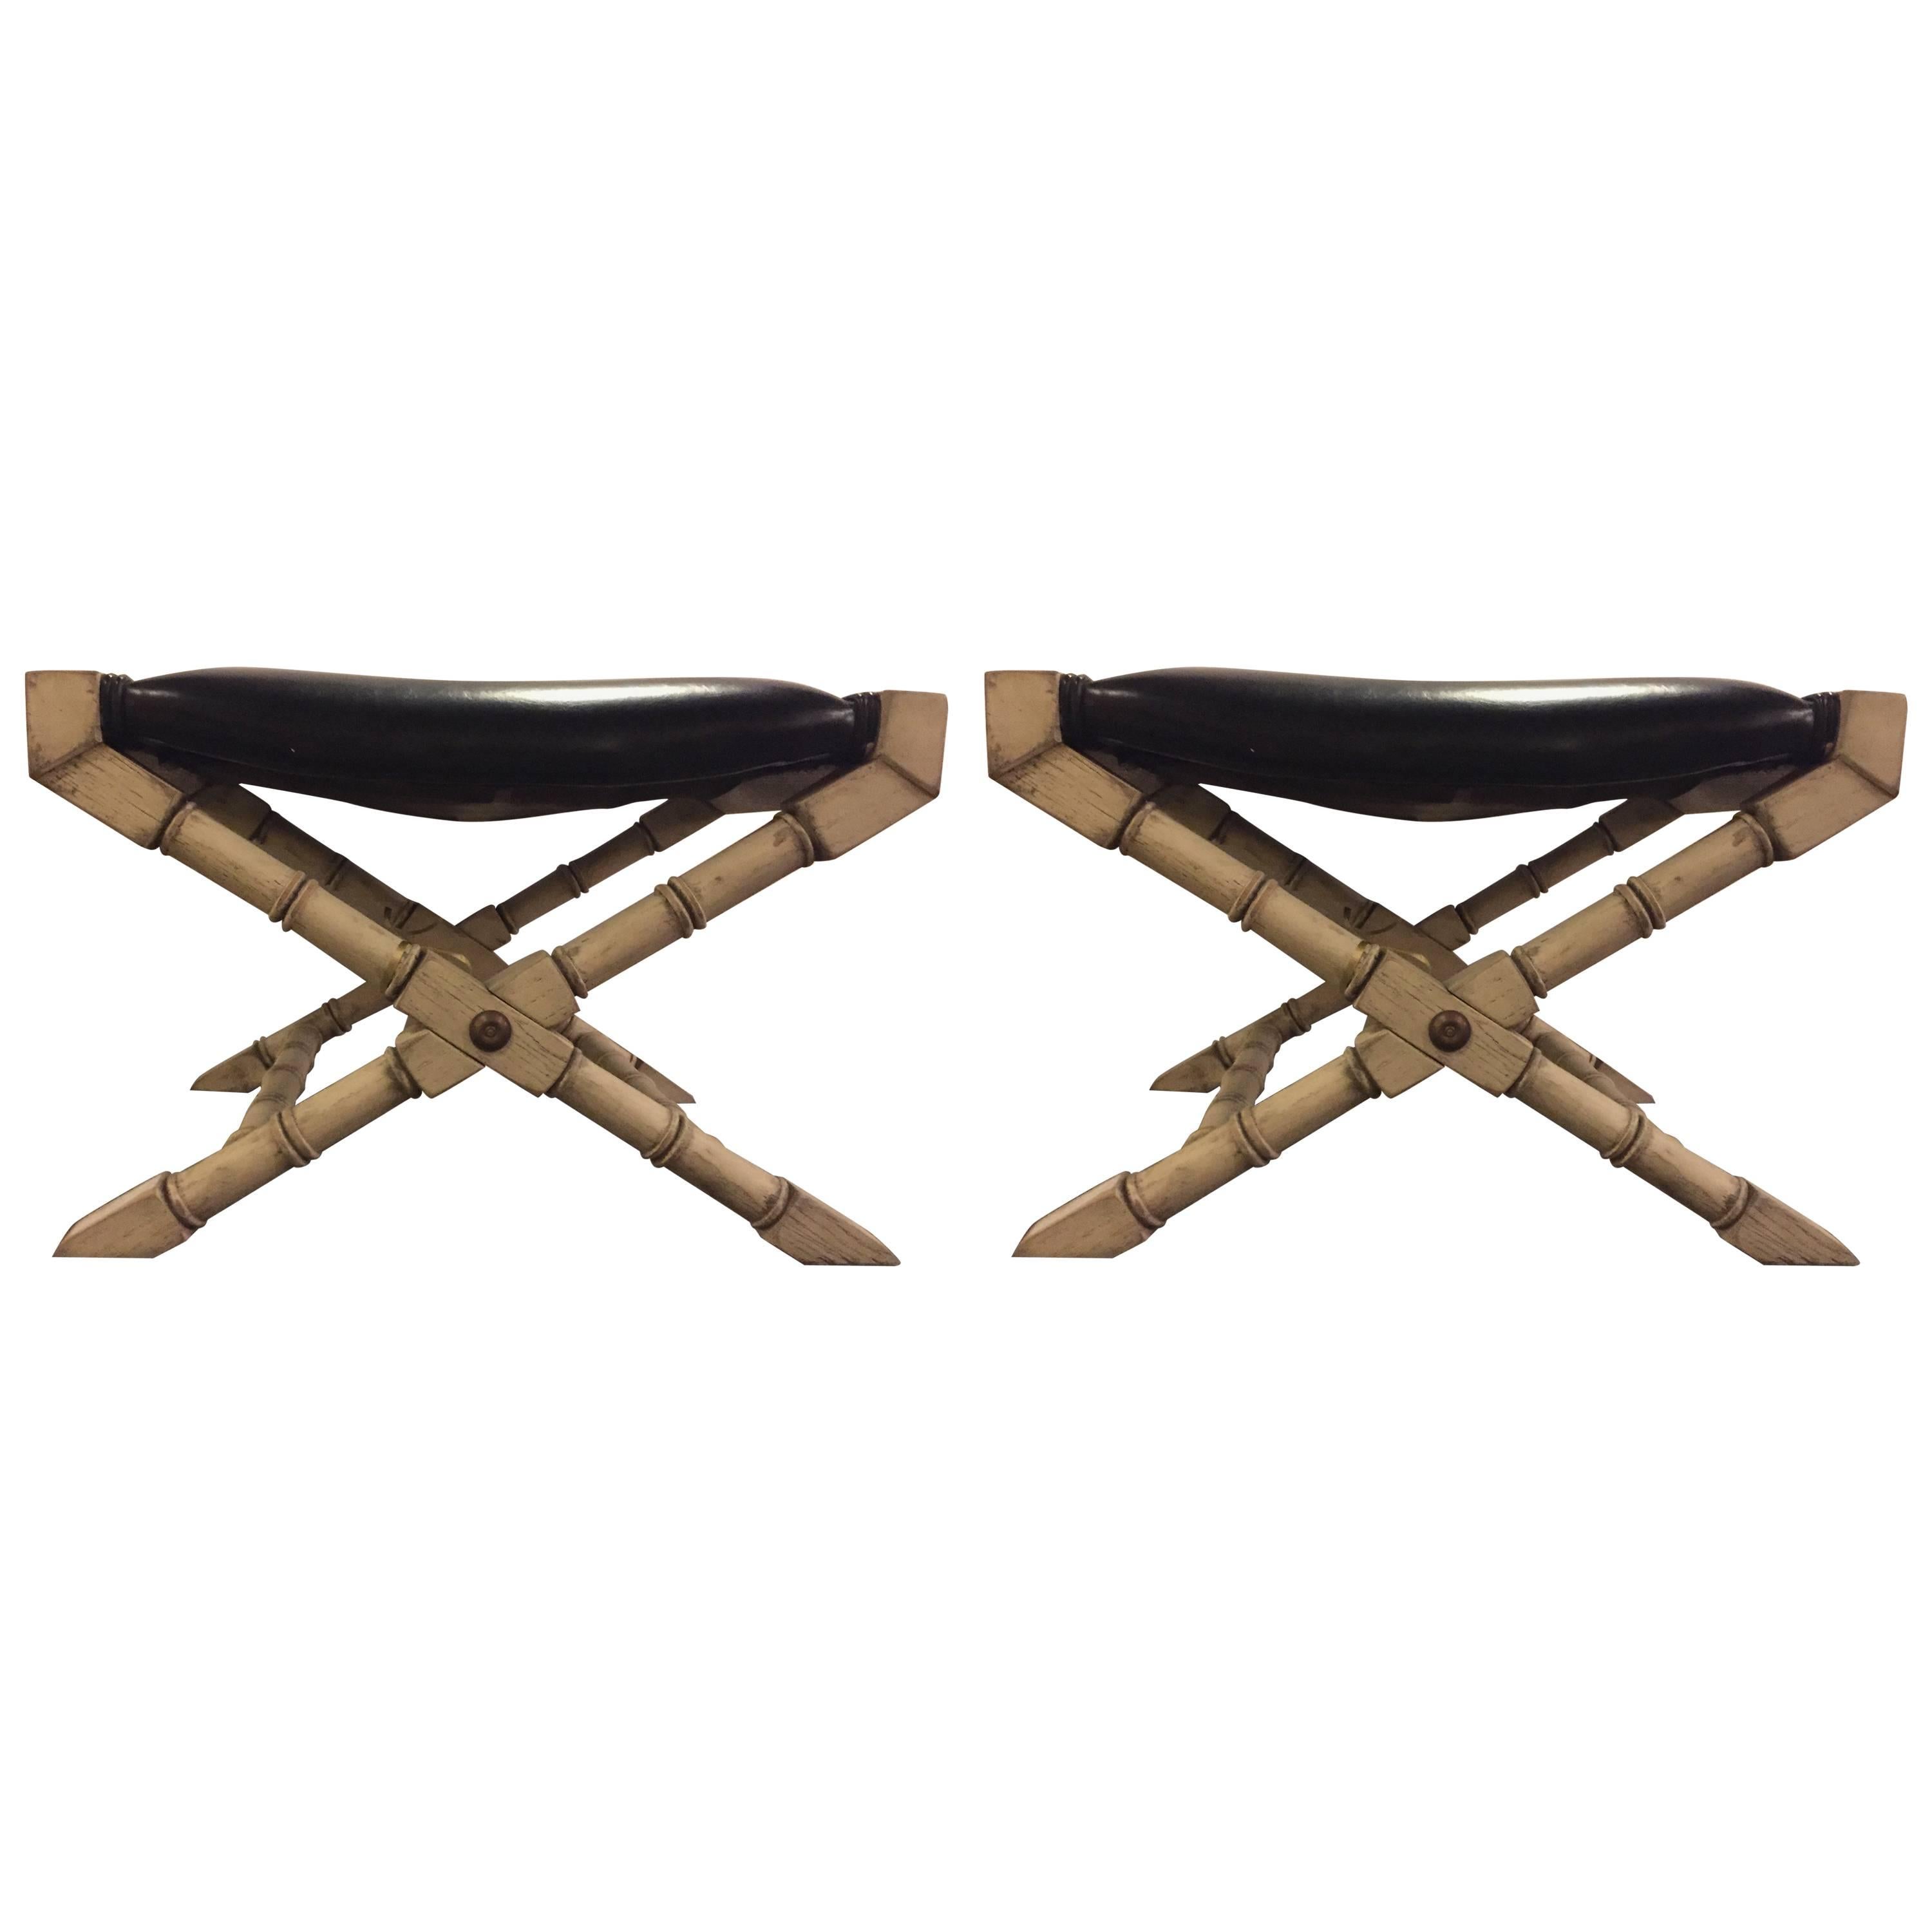 Pair of Hollywood Regency Style Faux Bamboo X-Form Benches